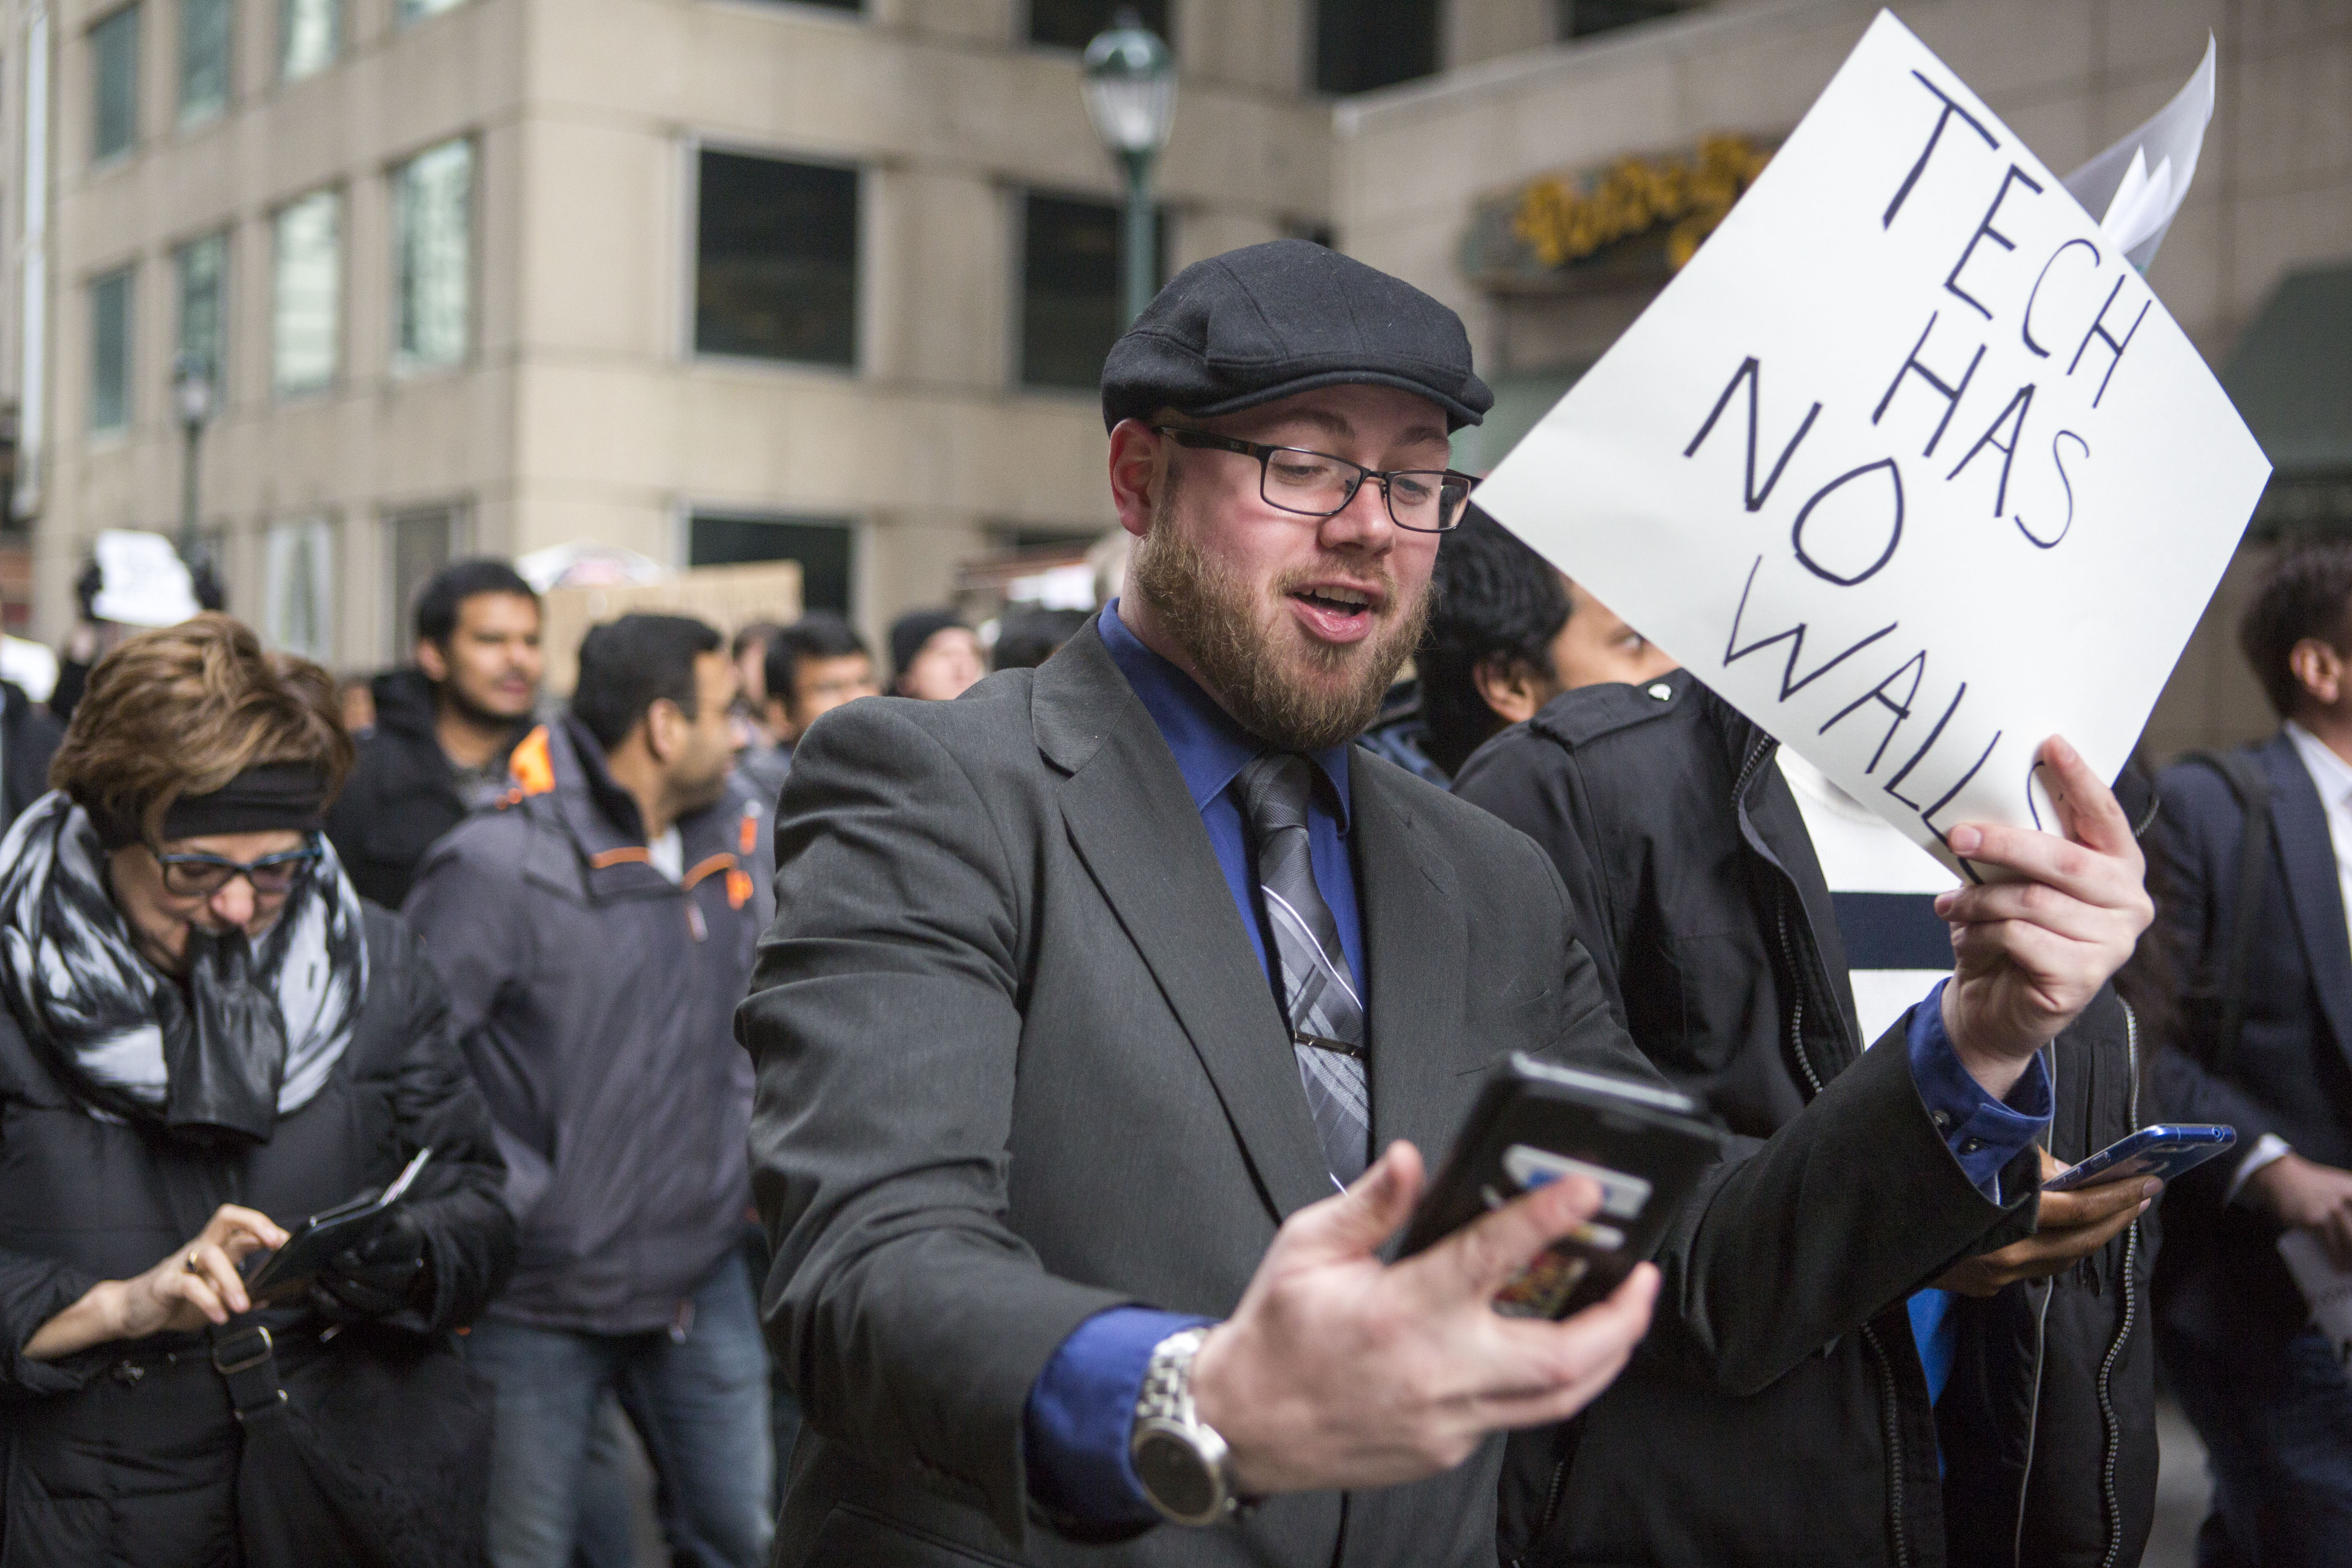 A man marching in a protest holds a sign reading “Tech has no walls”